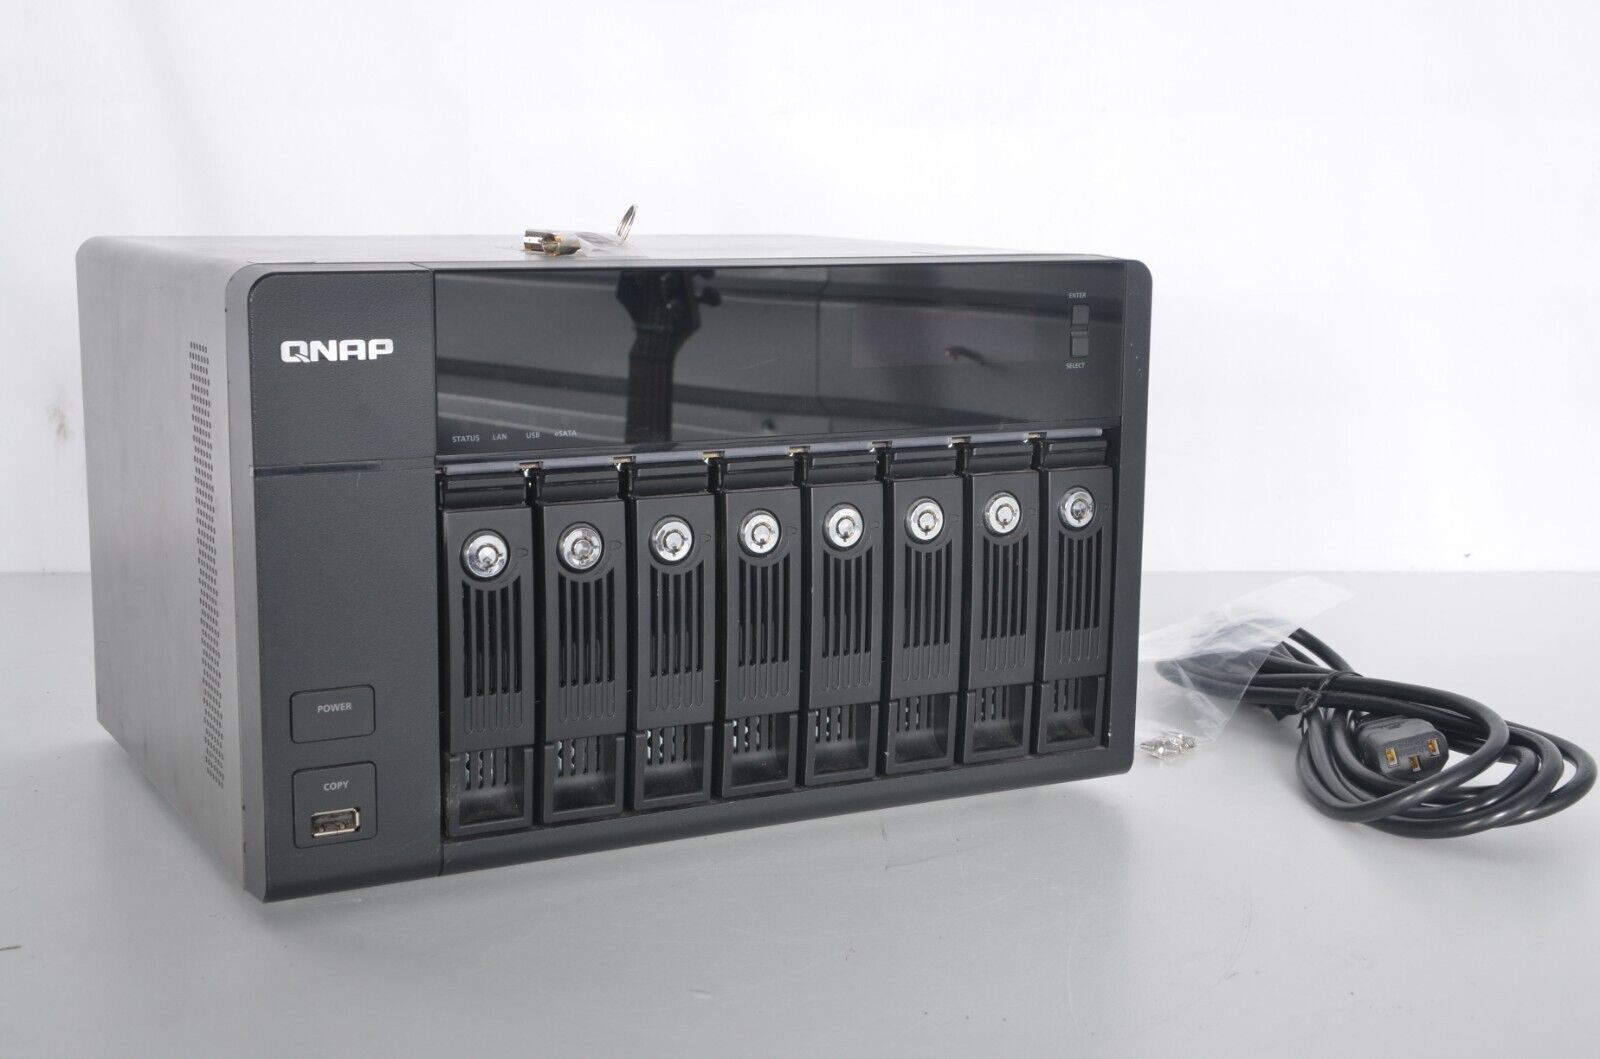 QNAP TS-859 Pro Network Attached Storage NAS 8 Bay No HDD Included Nice Shape